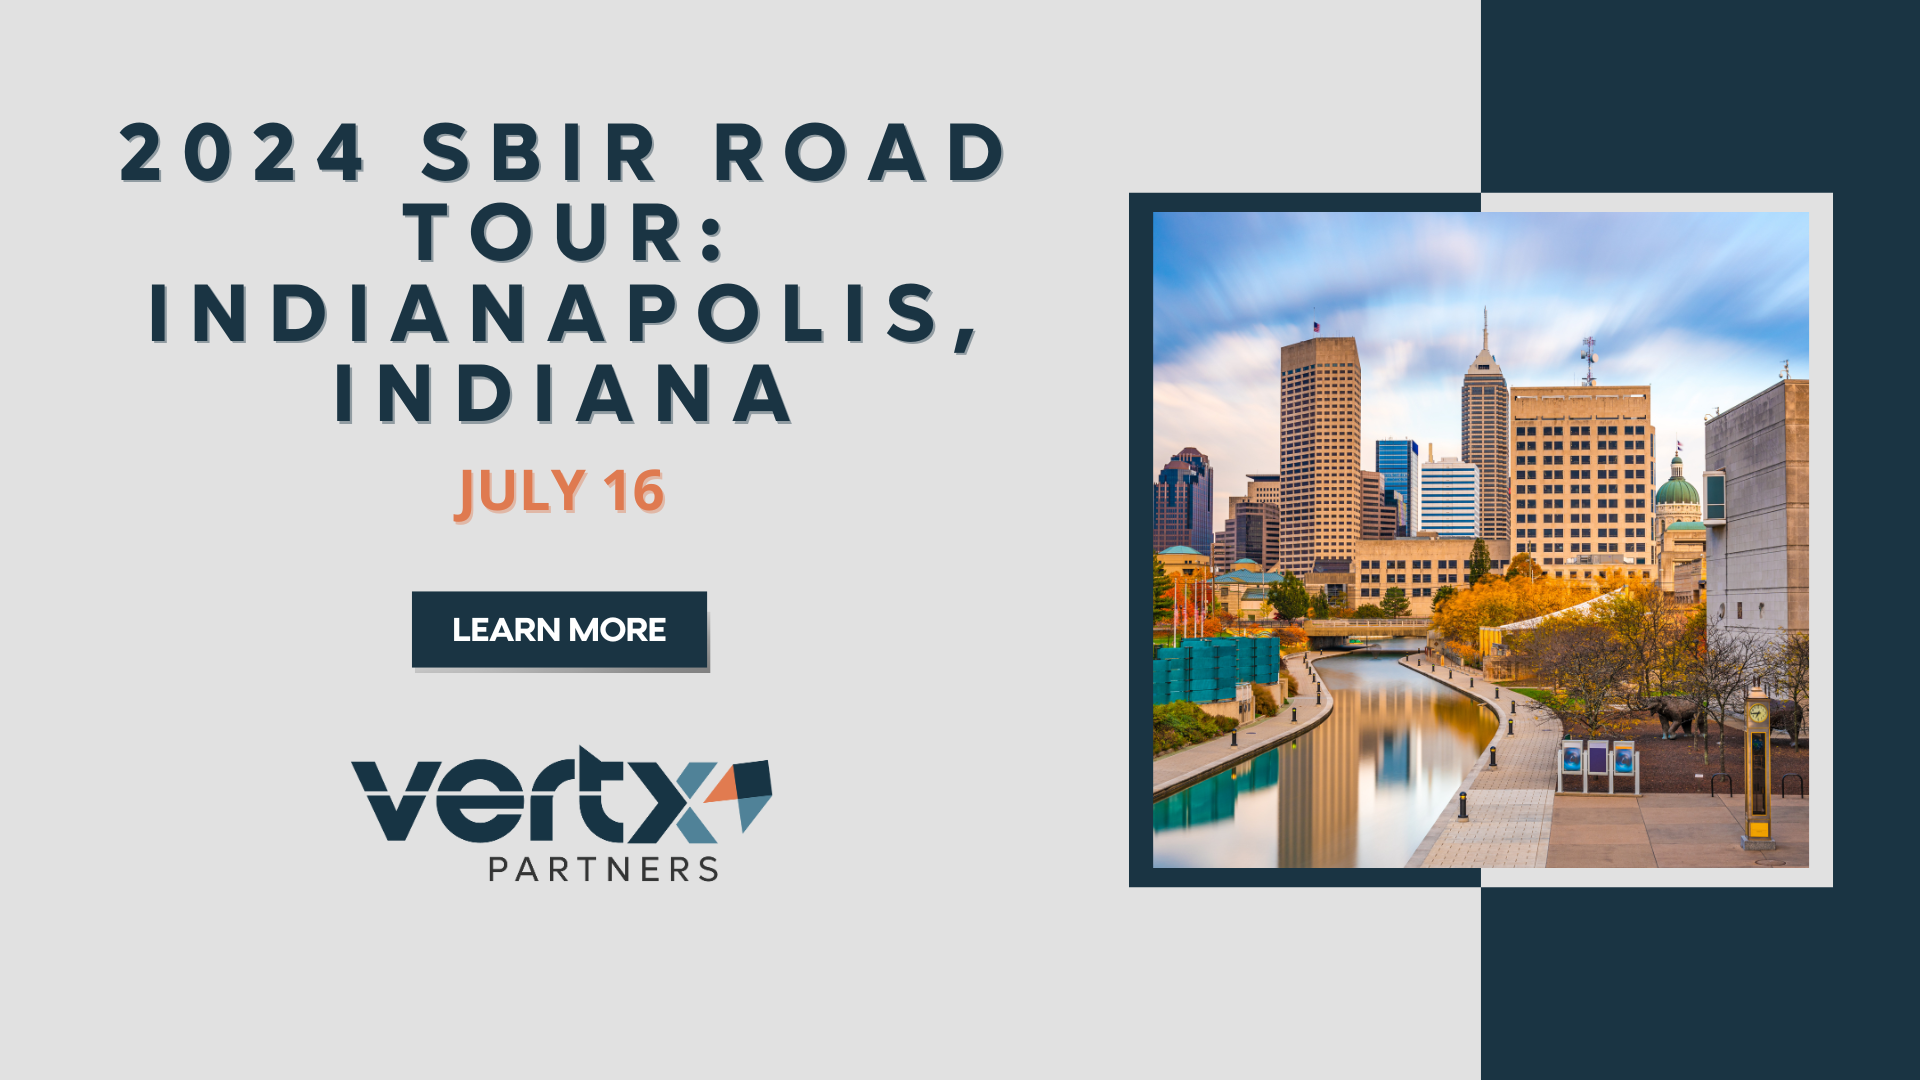 this graphic has the title 2024 SBIR Road Tour: Indianapolis, Indiana with the date july 16 under it and a photo of downtown indianapolis indiana with a river flowing through and a sunset in the background.